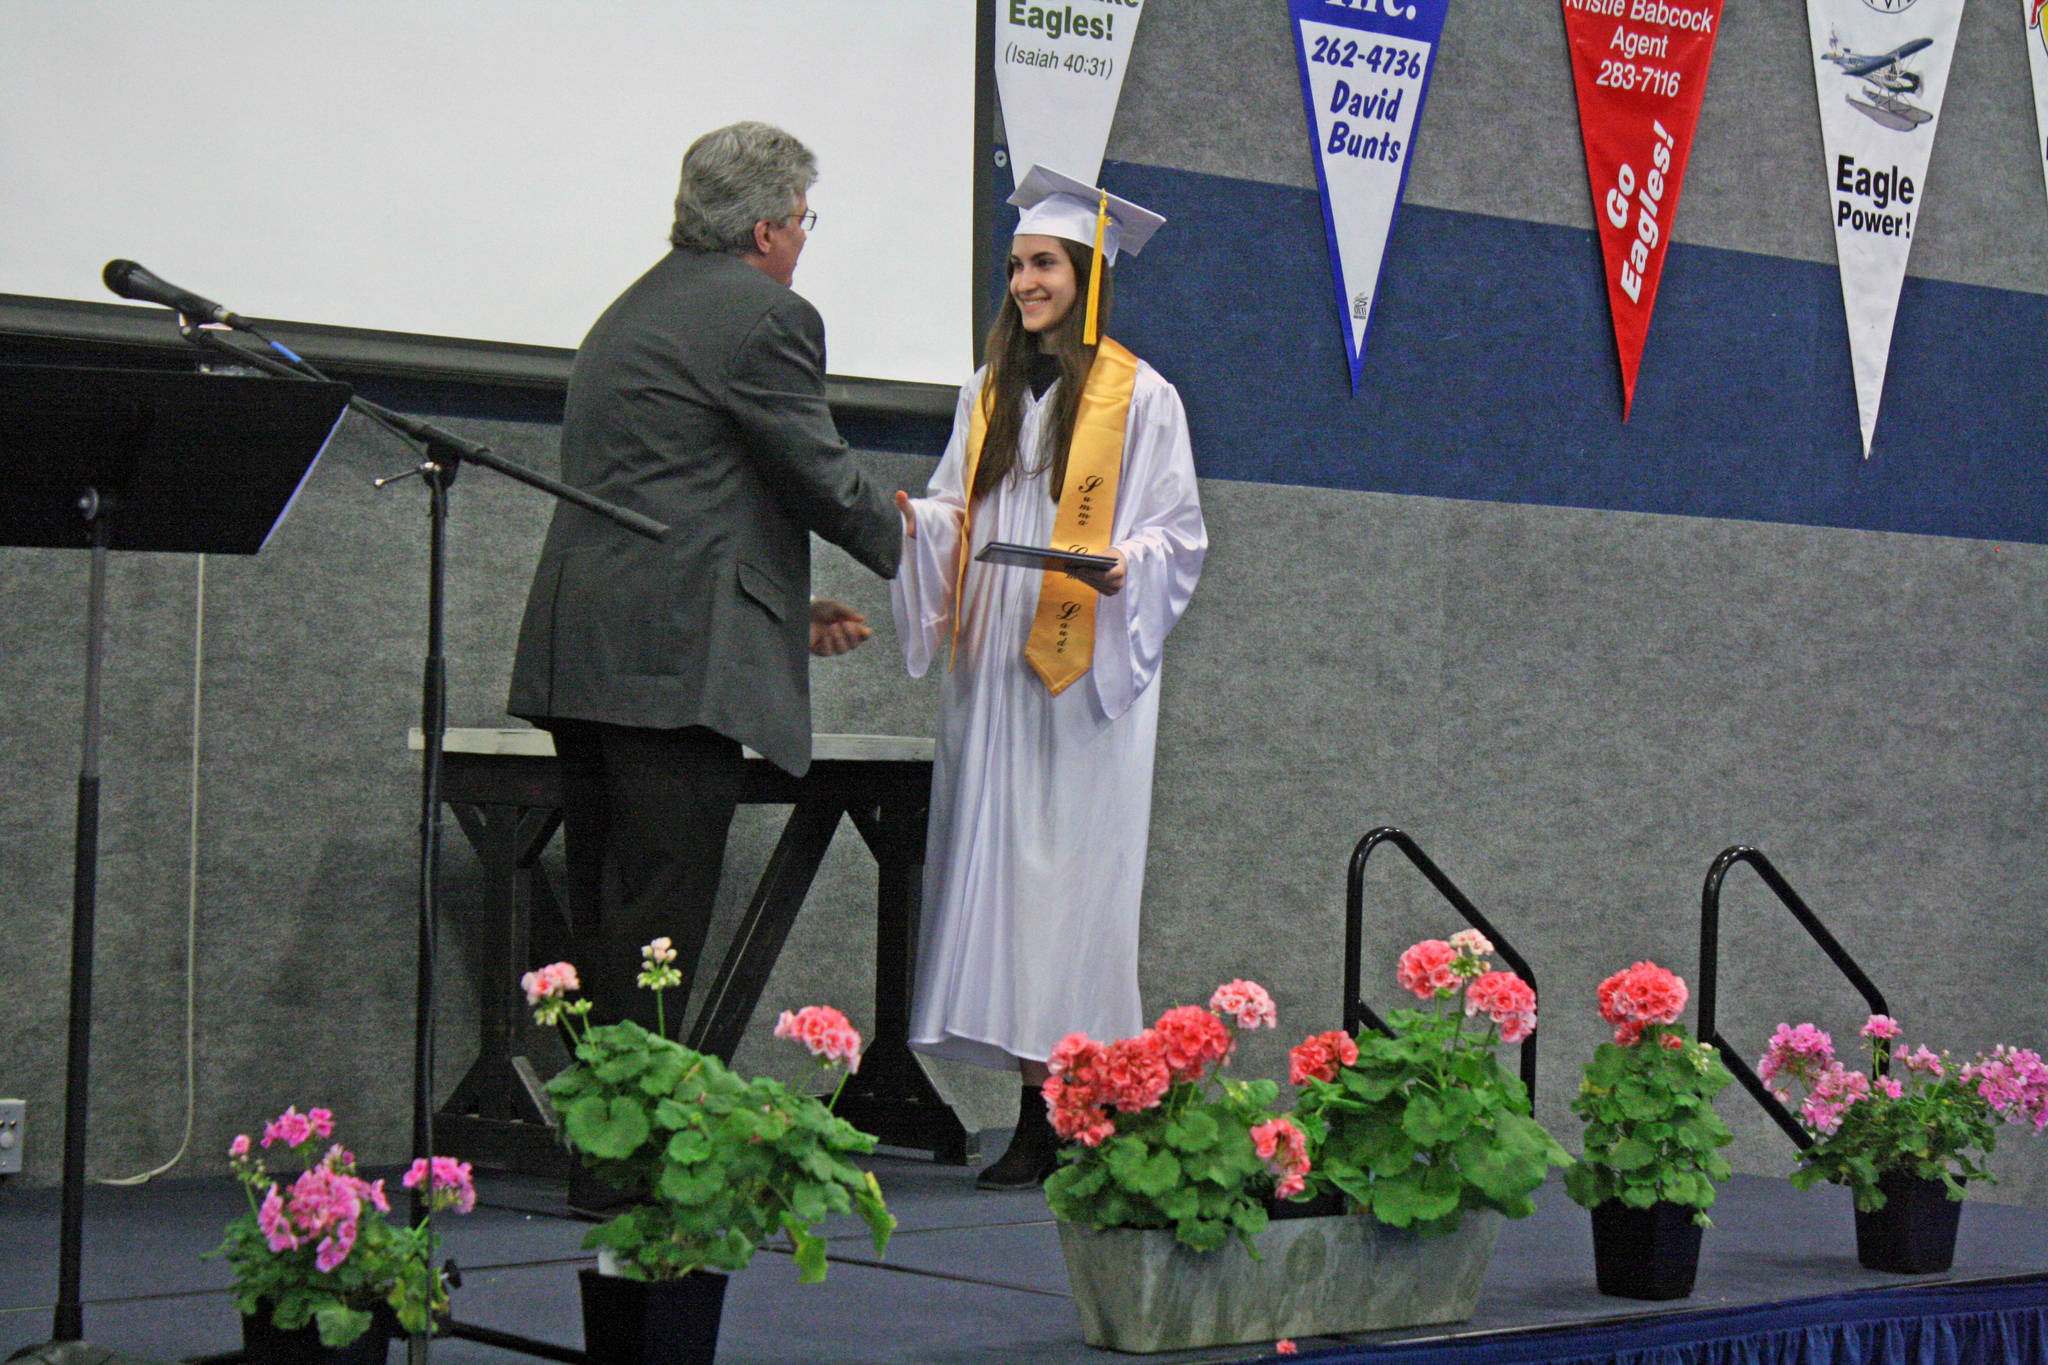 Chanelle Frances Usvat accepts her diploma from Cook Inlet Academy in Soldotna, Alaska, on Sunday, May 6. Usvat, who graduated summa cum laude, plans to attend the University of Alaska Anchorage in the fall and hopes to become a psychiatric mental health nurse practitioner. (Photo by Erin Thompson/Peninsula Clarion)